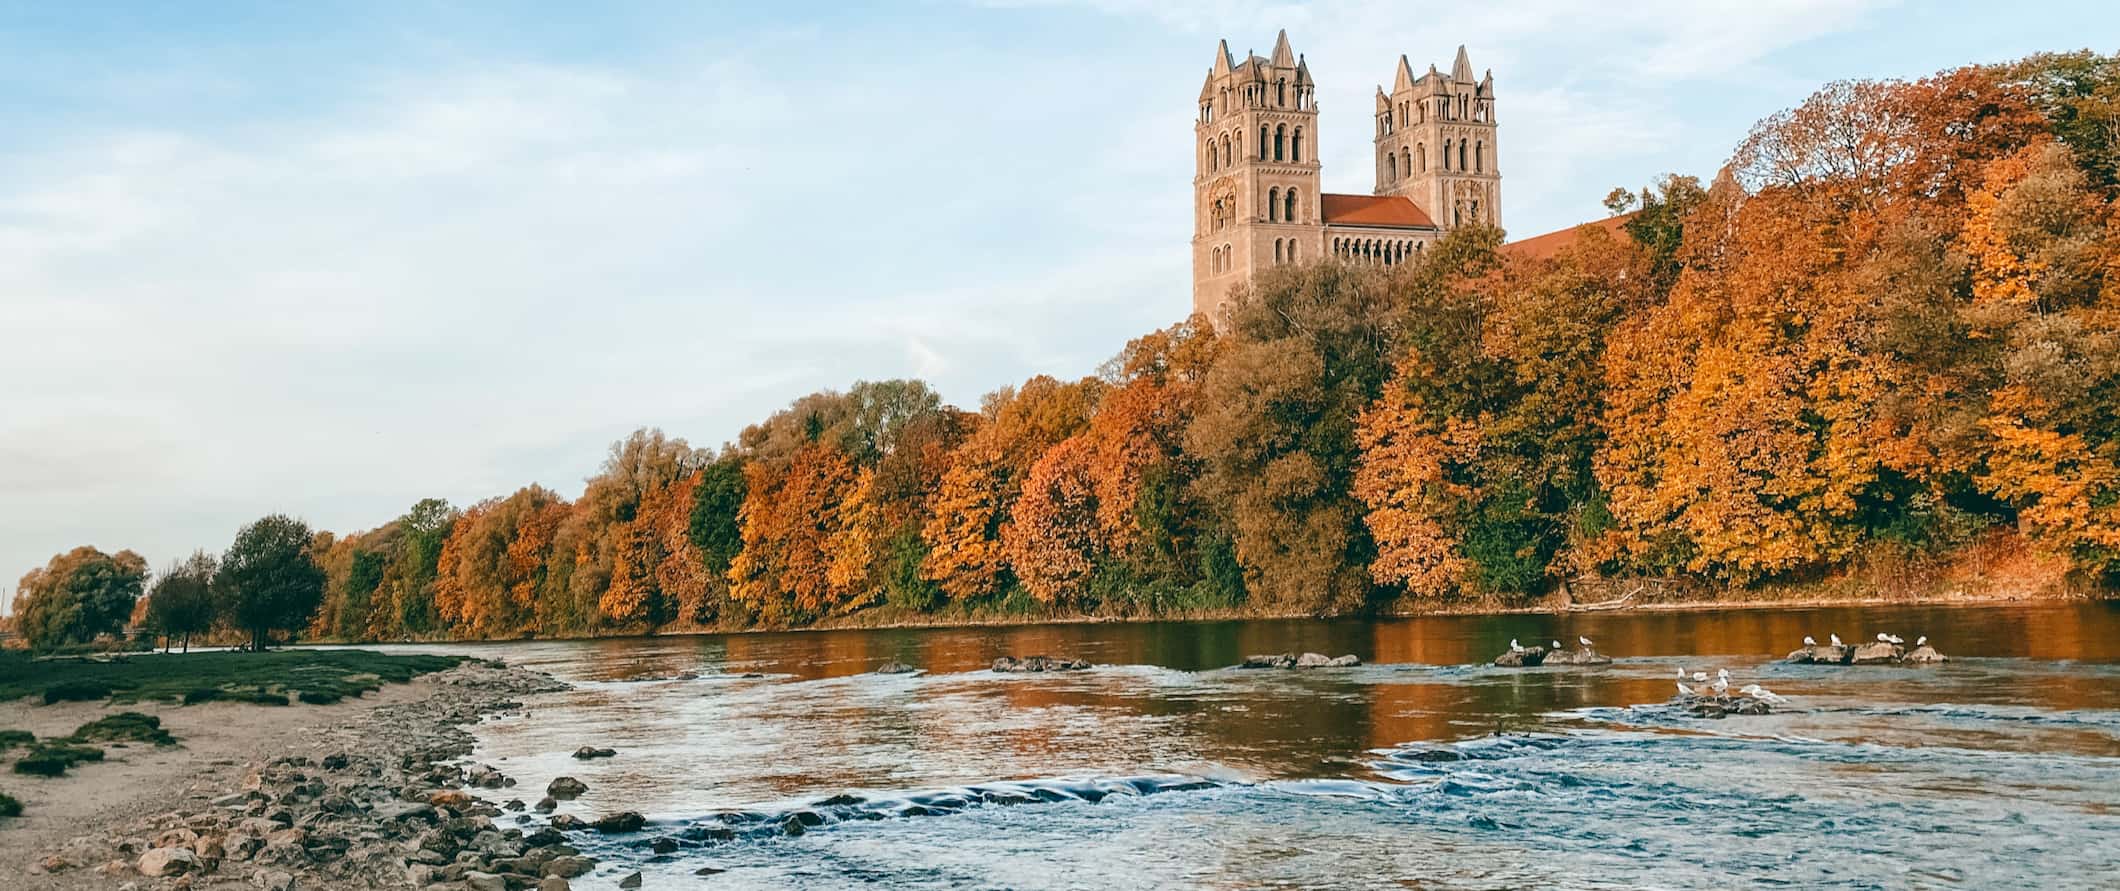 Munich, Germany as seen from the river surrounded by trees on a quiet day